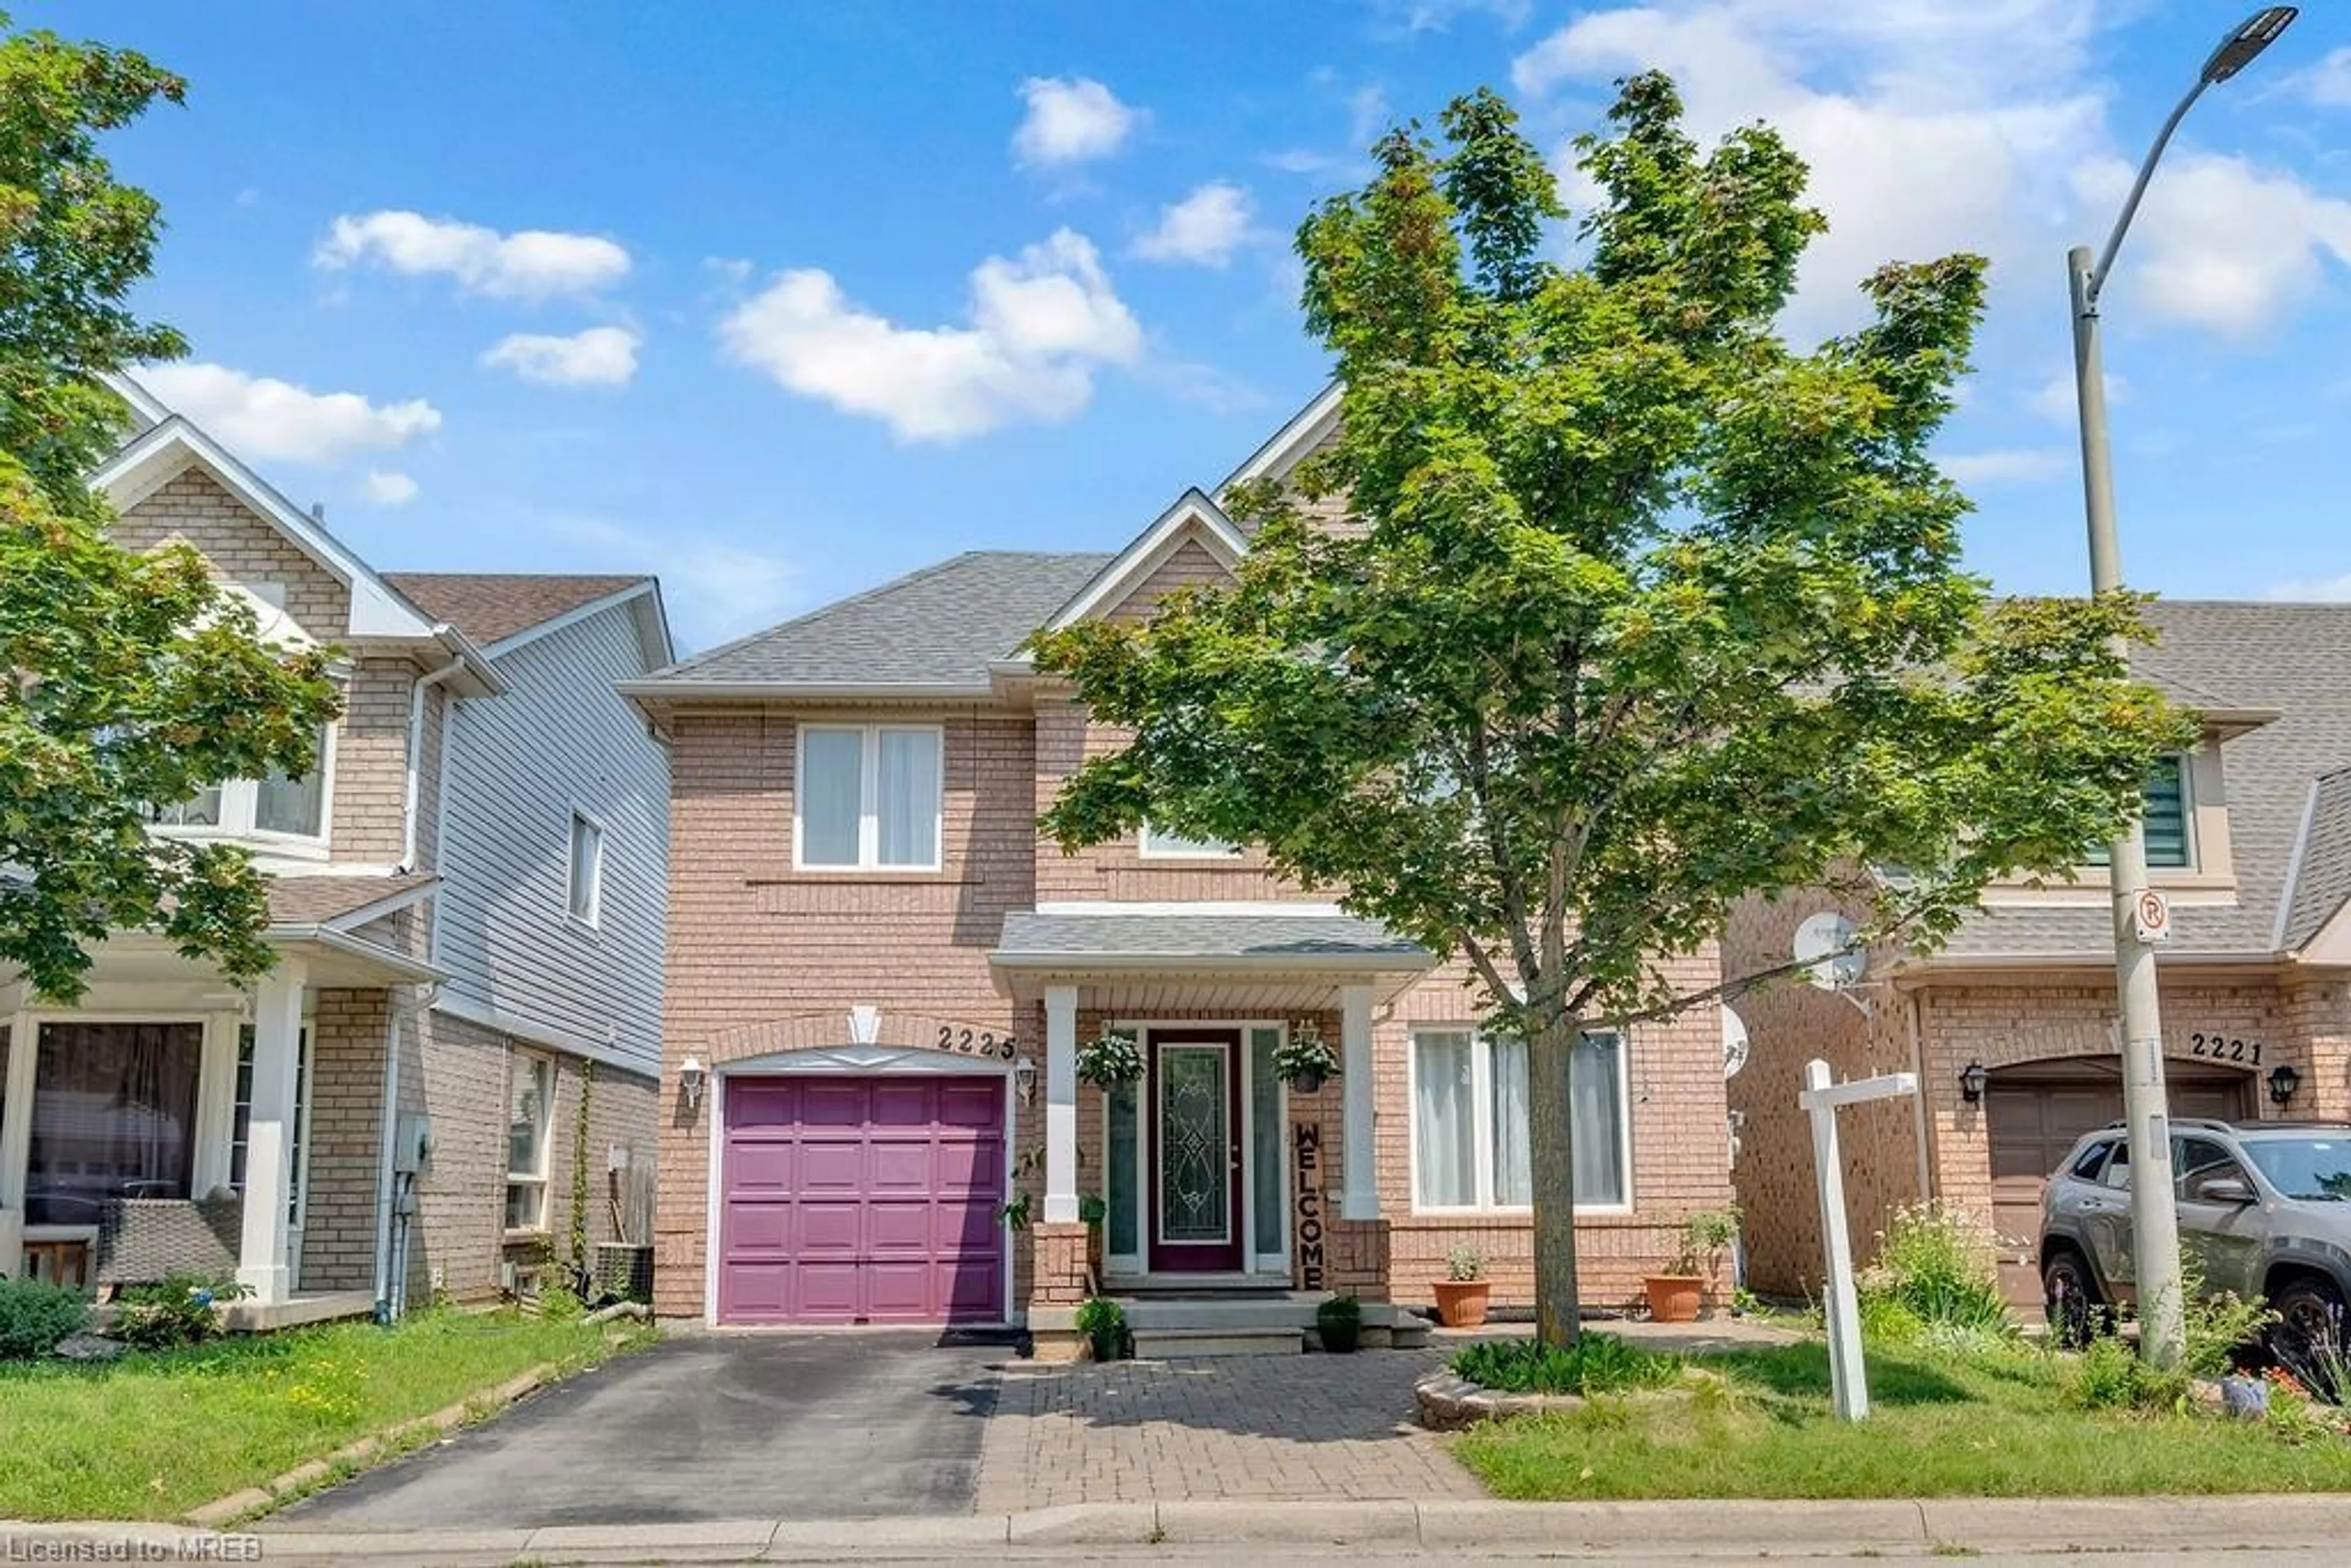 Frontside or backside of a home for 2225 Shadetree Ave, Burlington Ontario L6L 6L4